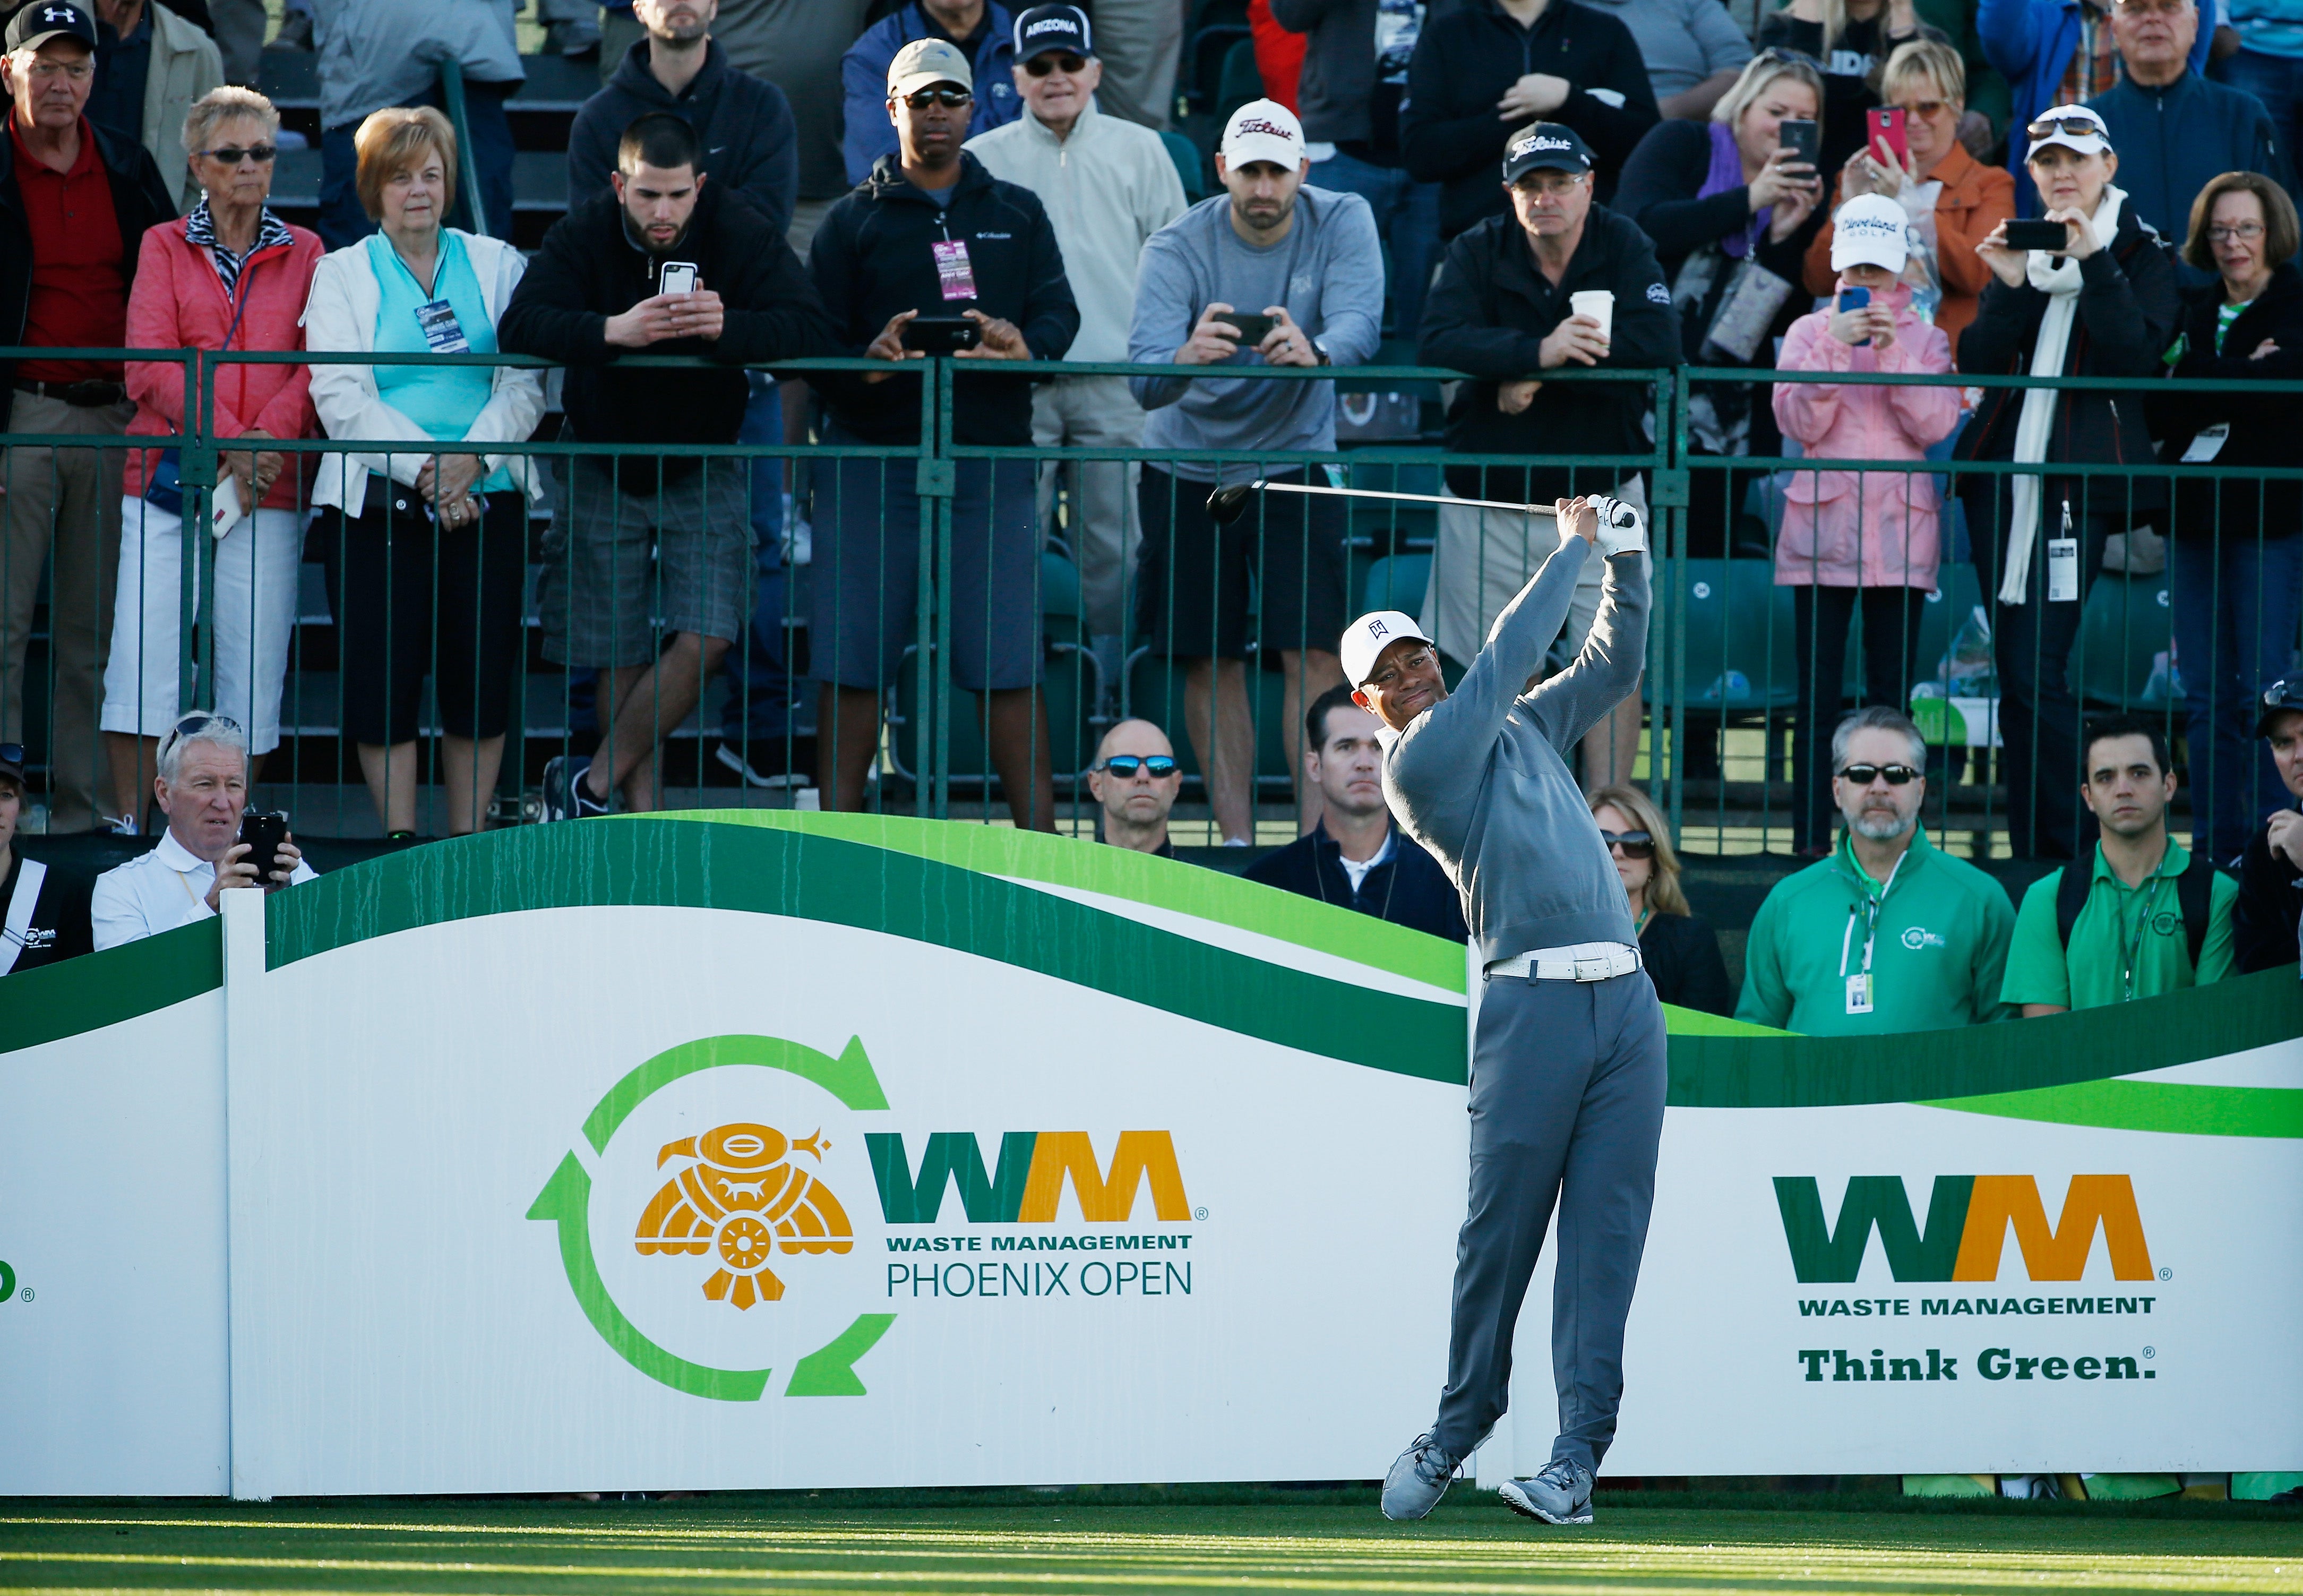 Tiger Woods Booed Then Cheered at 16th Hole During Phoenix Open Pro-Am4338 x 3006